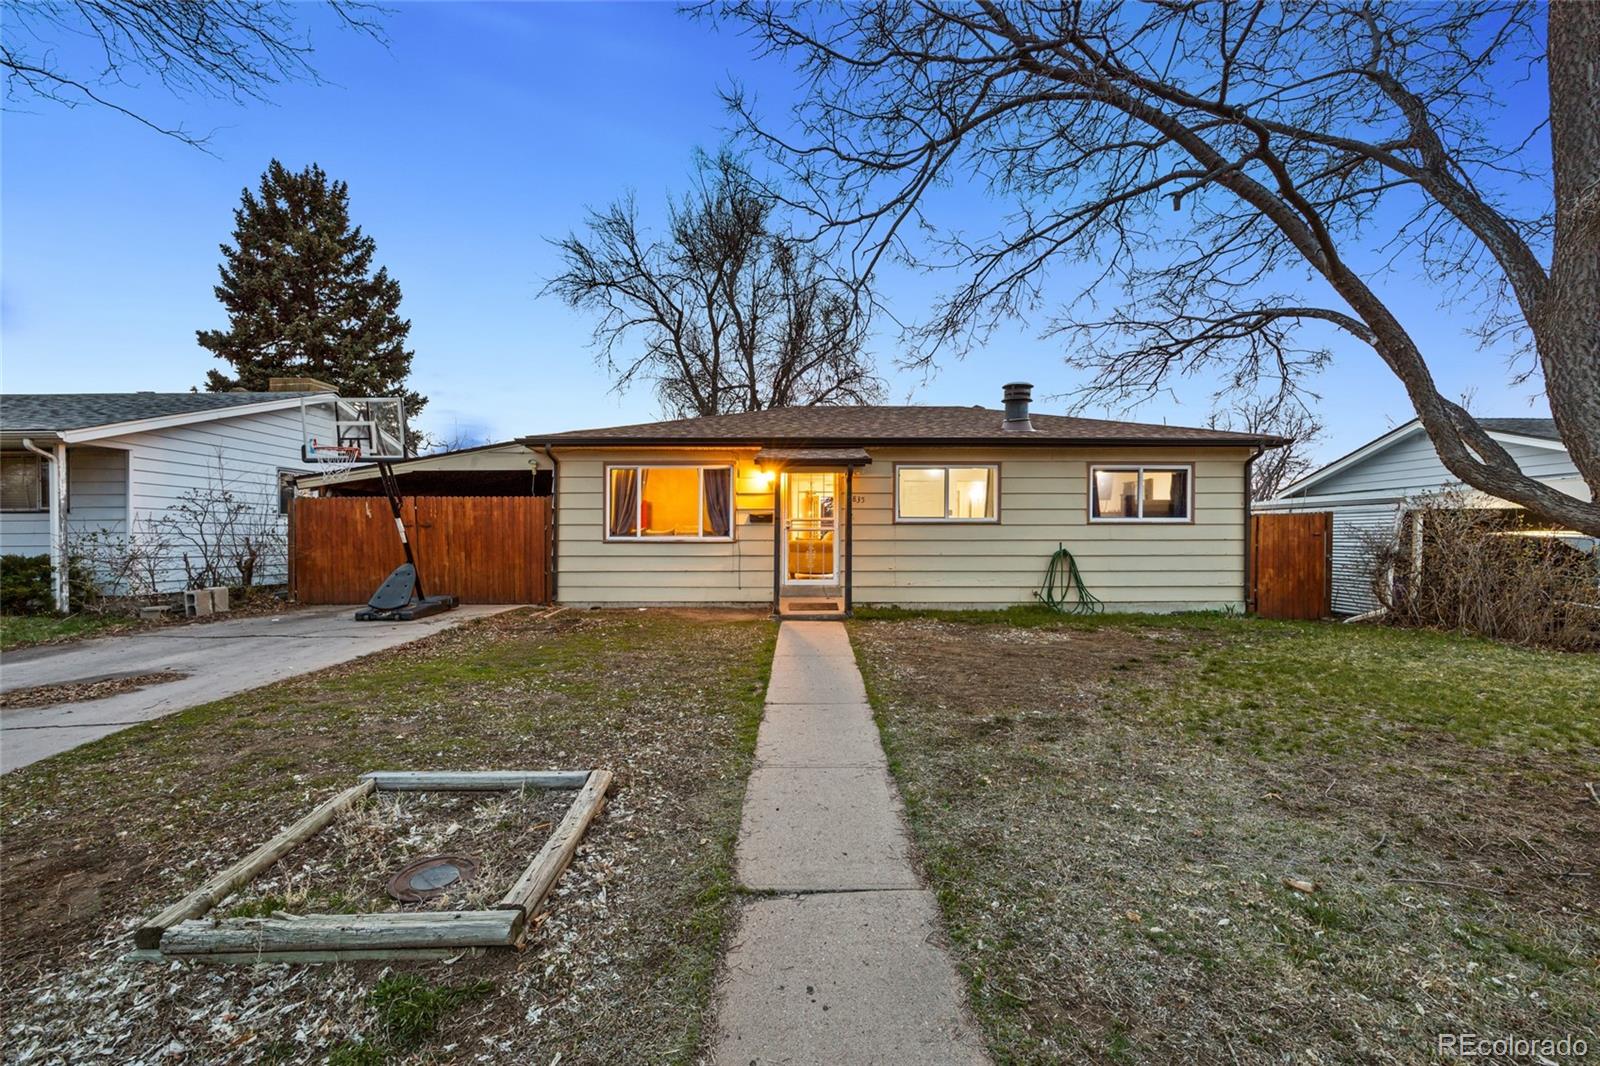 1835 s vrain street, denver sold home. Closed on 2024-06-07 for $476,500.